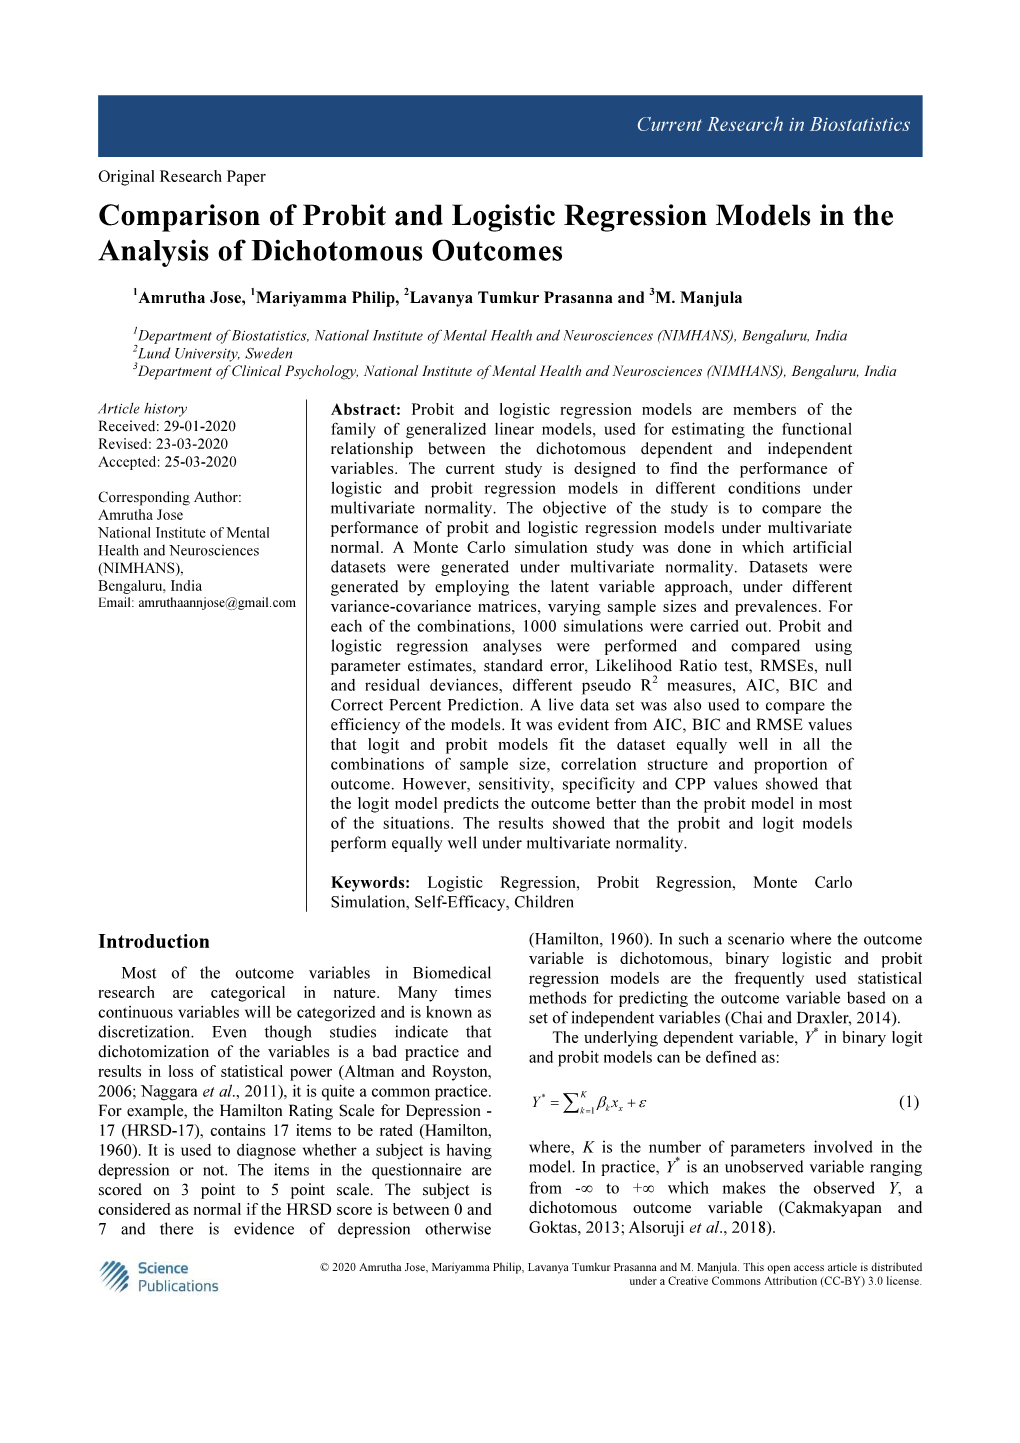 Comparison of Probit and Logistic Regression Models in the Analysis of Dichotomous Outcomes